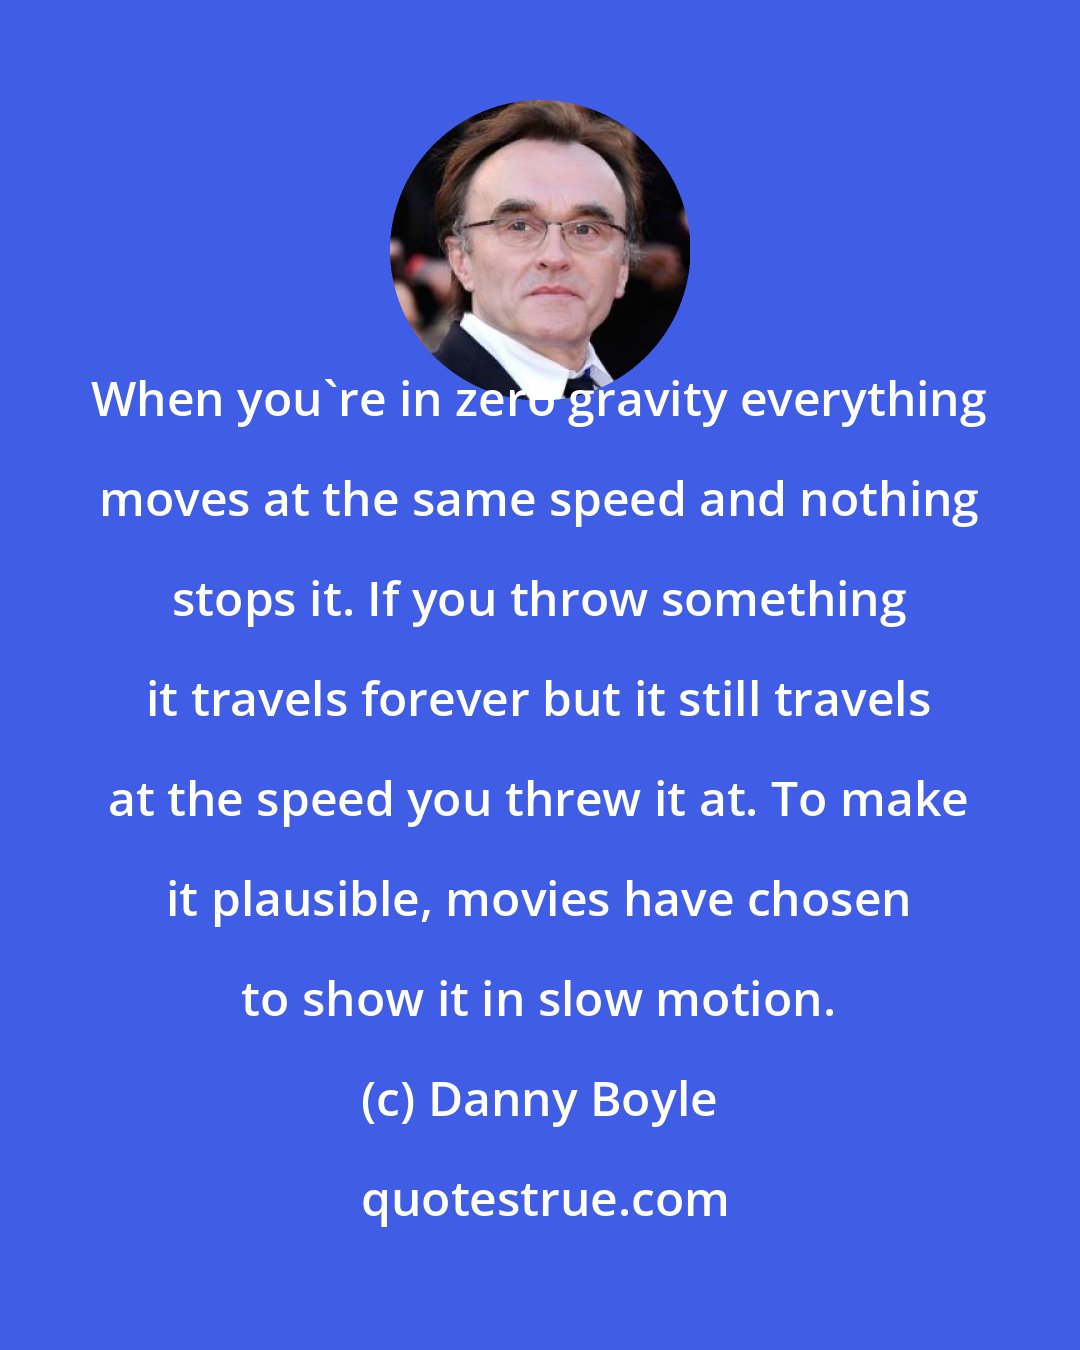 Danny Boyle: When you're in zero gravity everything moves at the same speed and nothing stops it. If you throw something it travels forever but it still travels at the speed you threw it at. To make it plausible, movies have chosen to show it in slow motion.